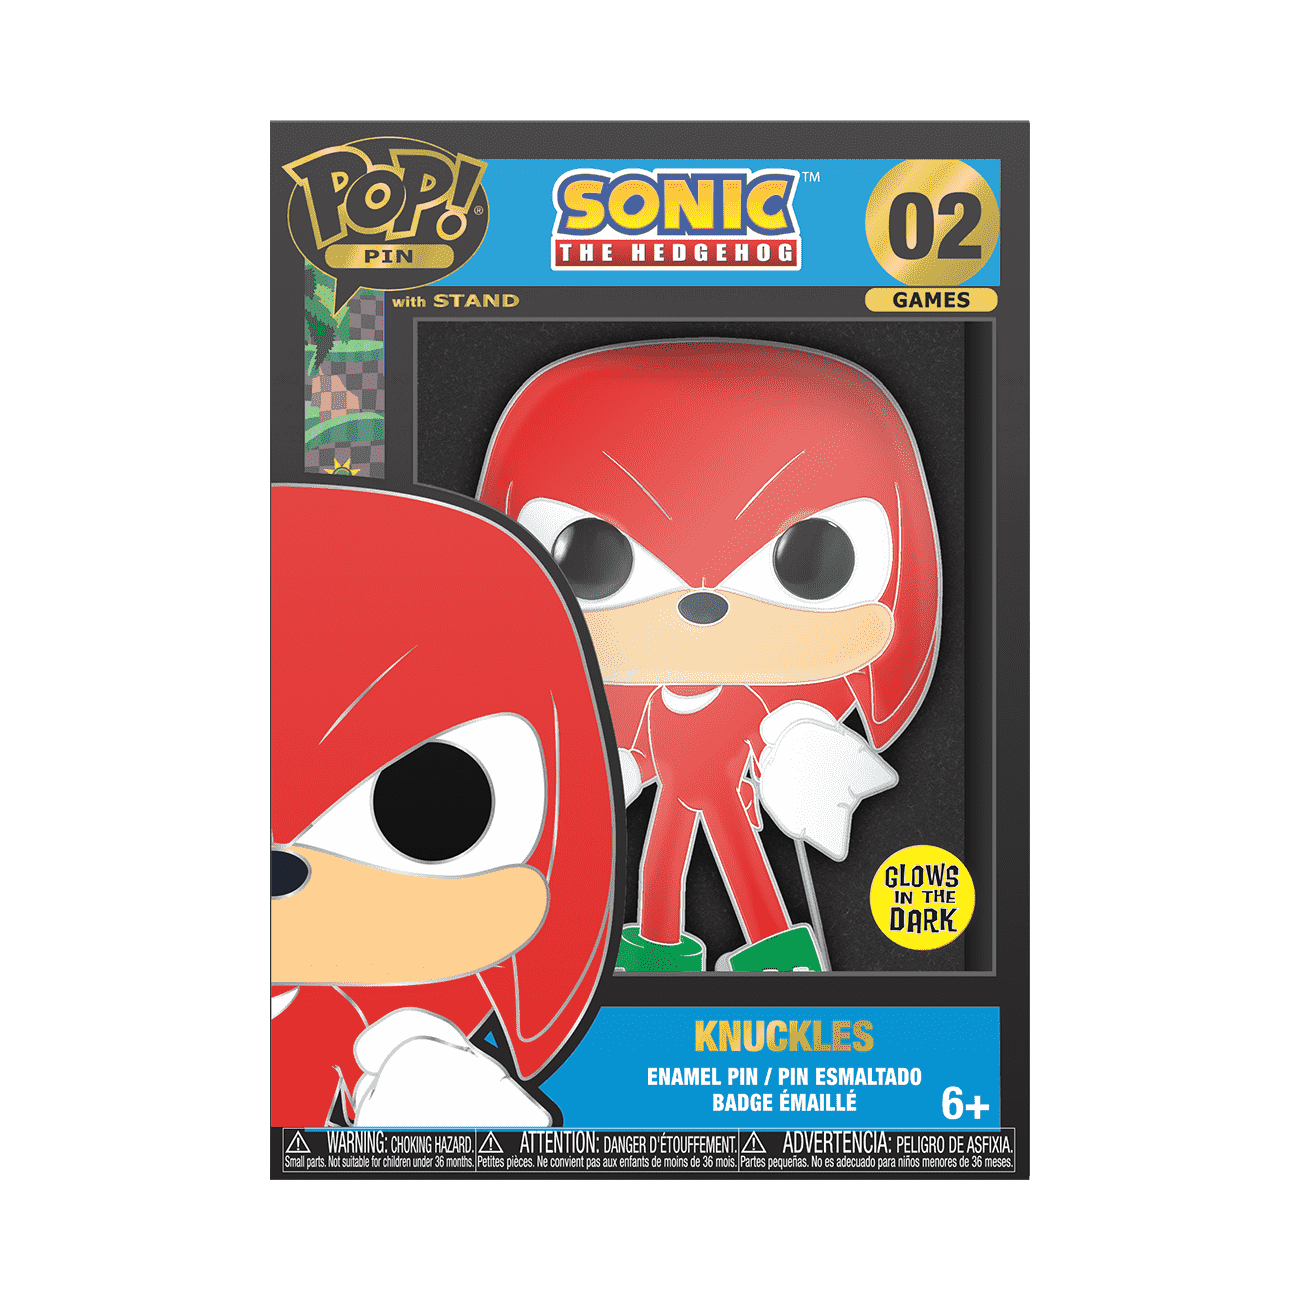 Buy Pop! Pin Knuckles (Glow) at Funko.